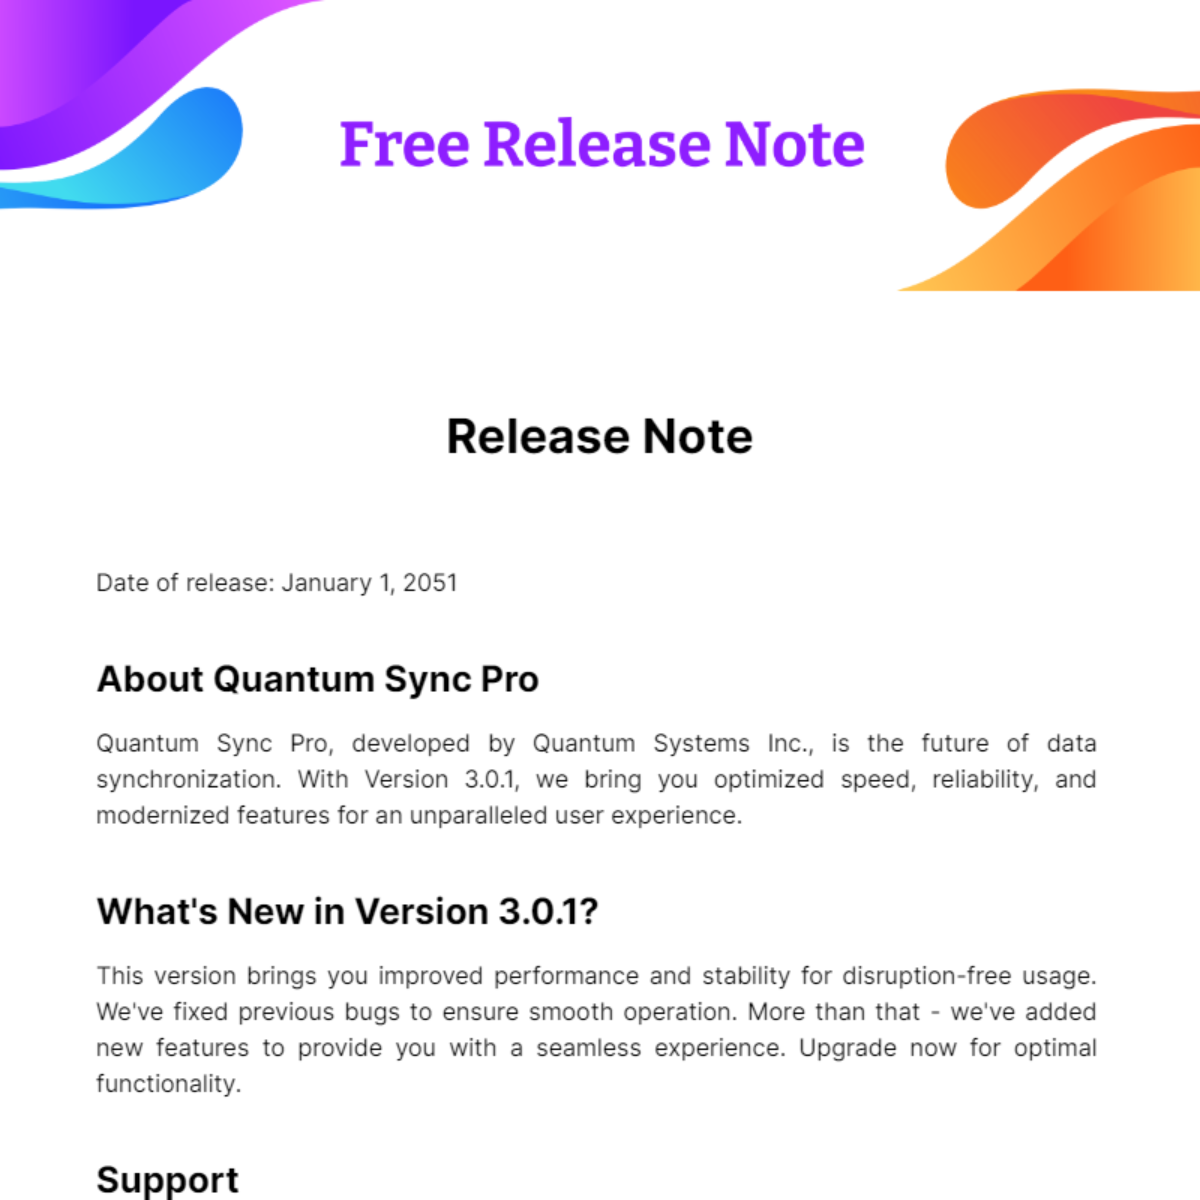 Free Release Note Template